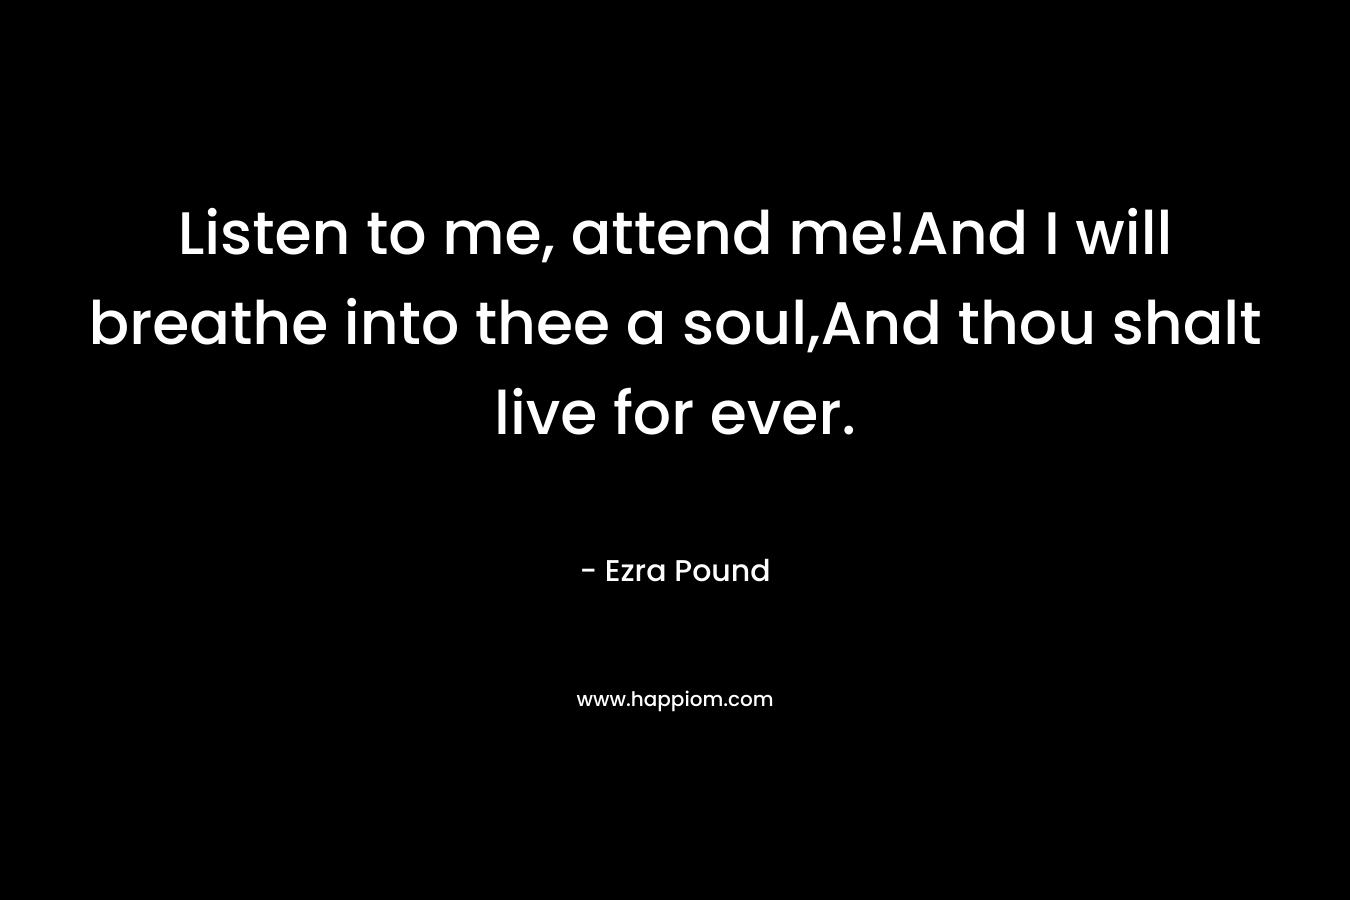 Listen to me, attend me!And I will breathe into thee a soul,And thou shalt live for ever. – Ezra Pound